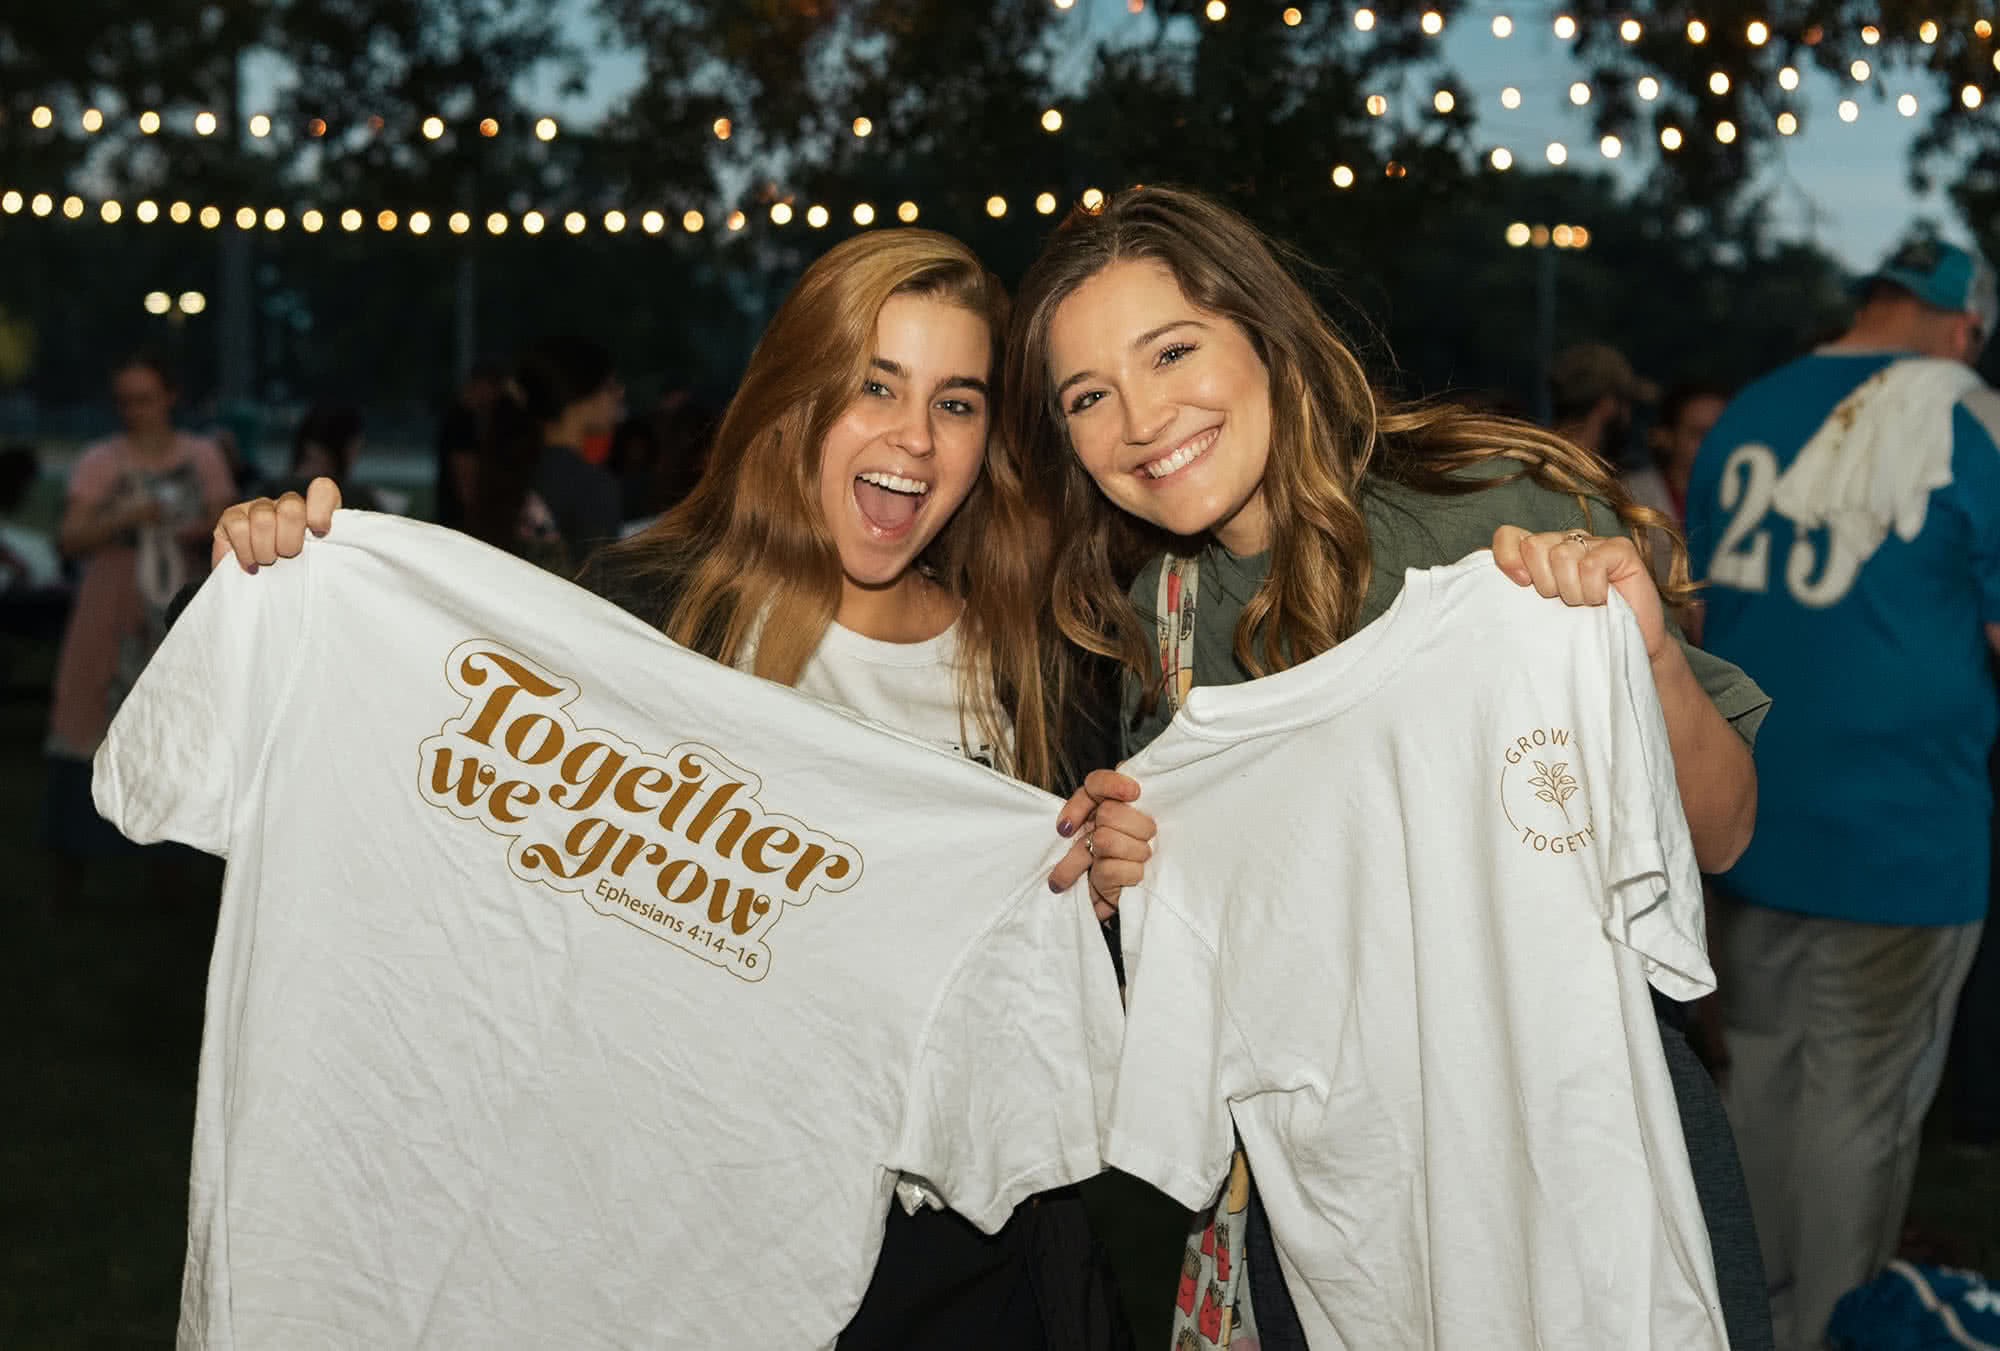 Two female students smiling and holding t-shirts.